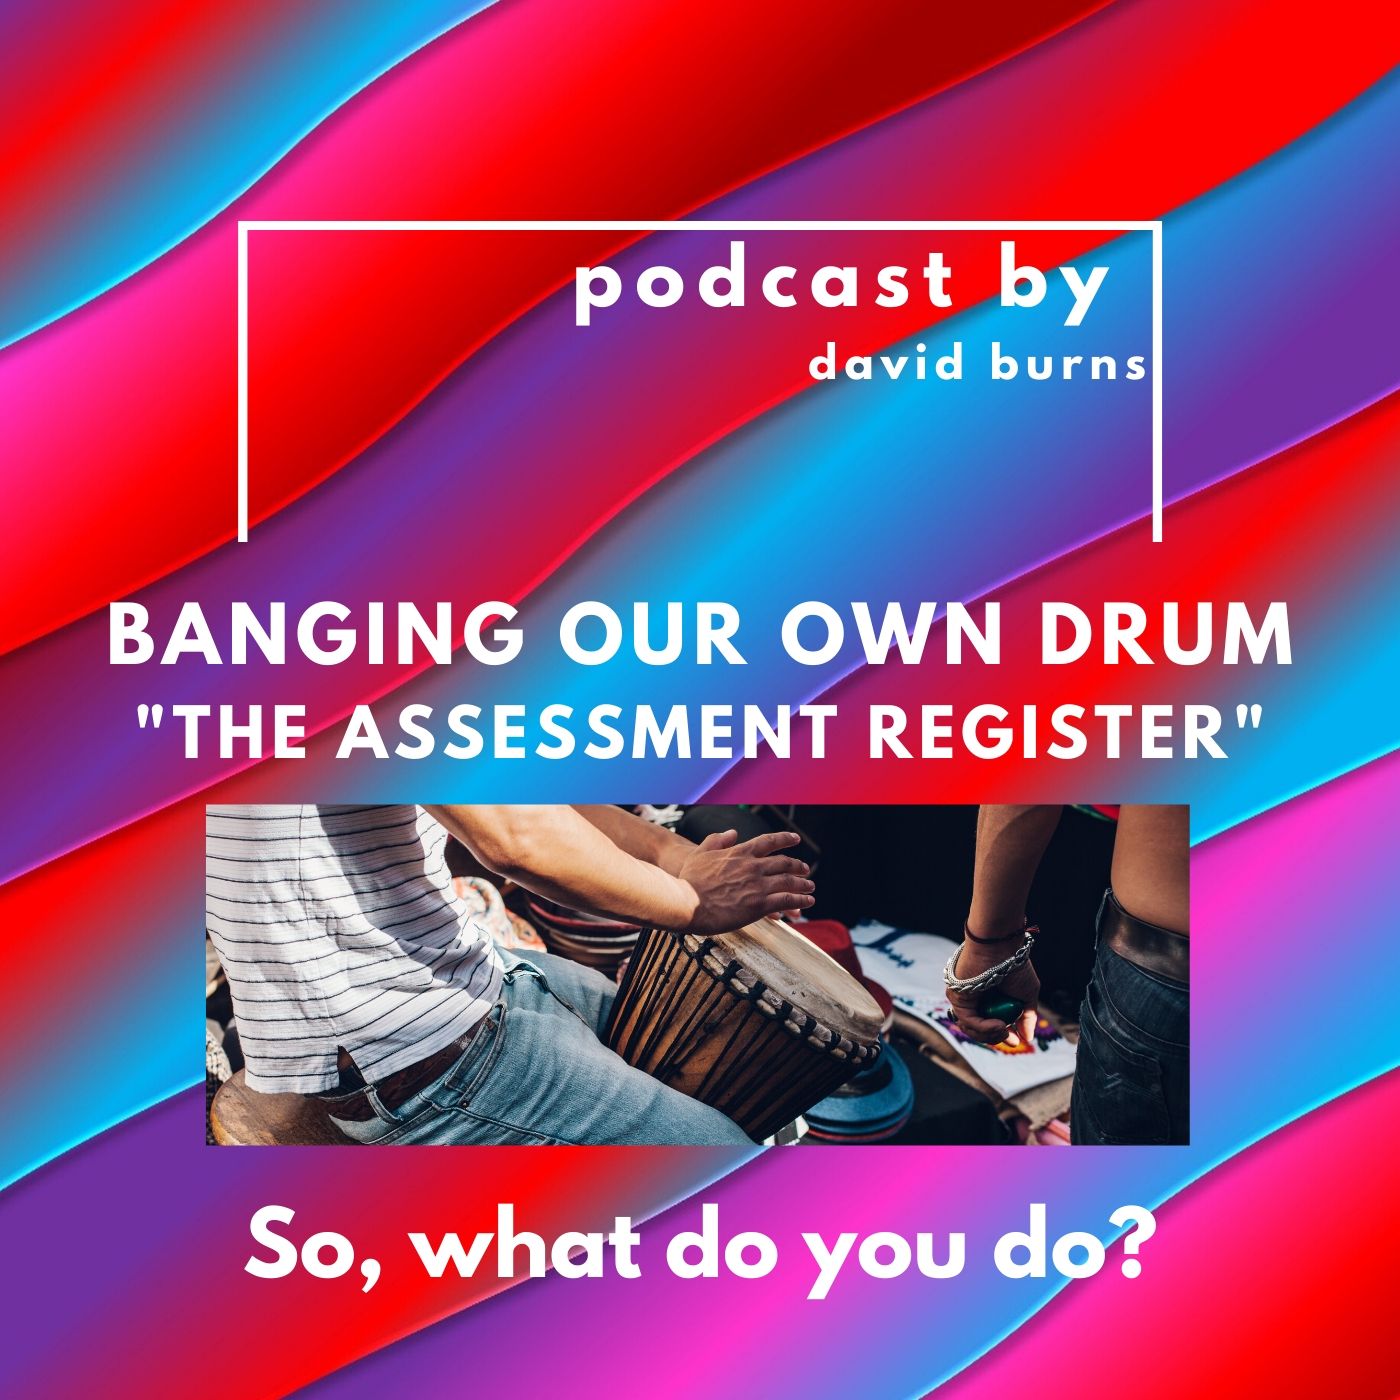 BANG OUR DRUM podcast